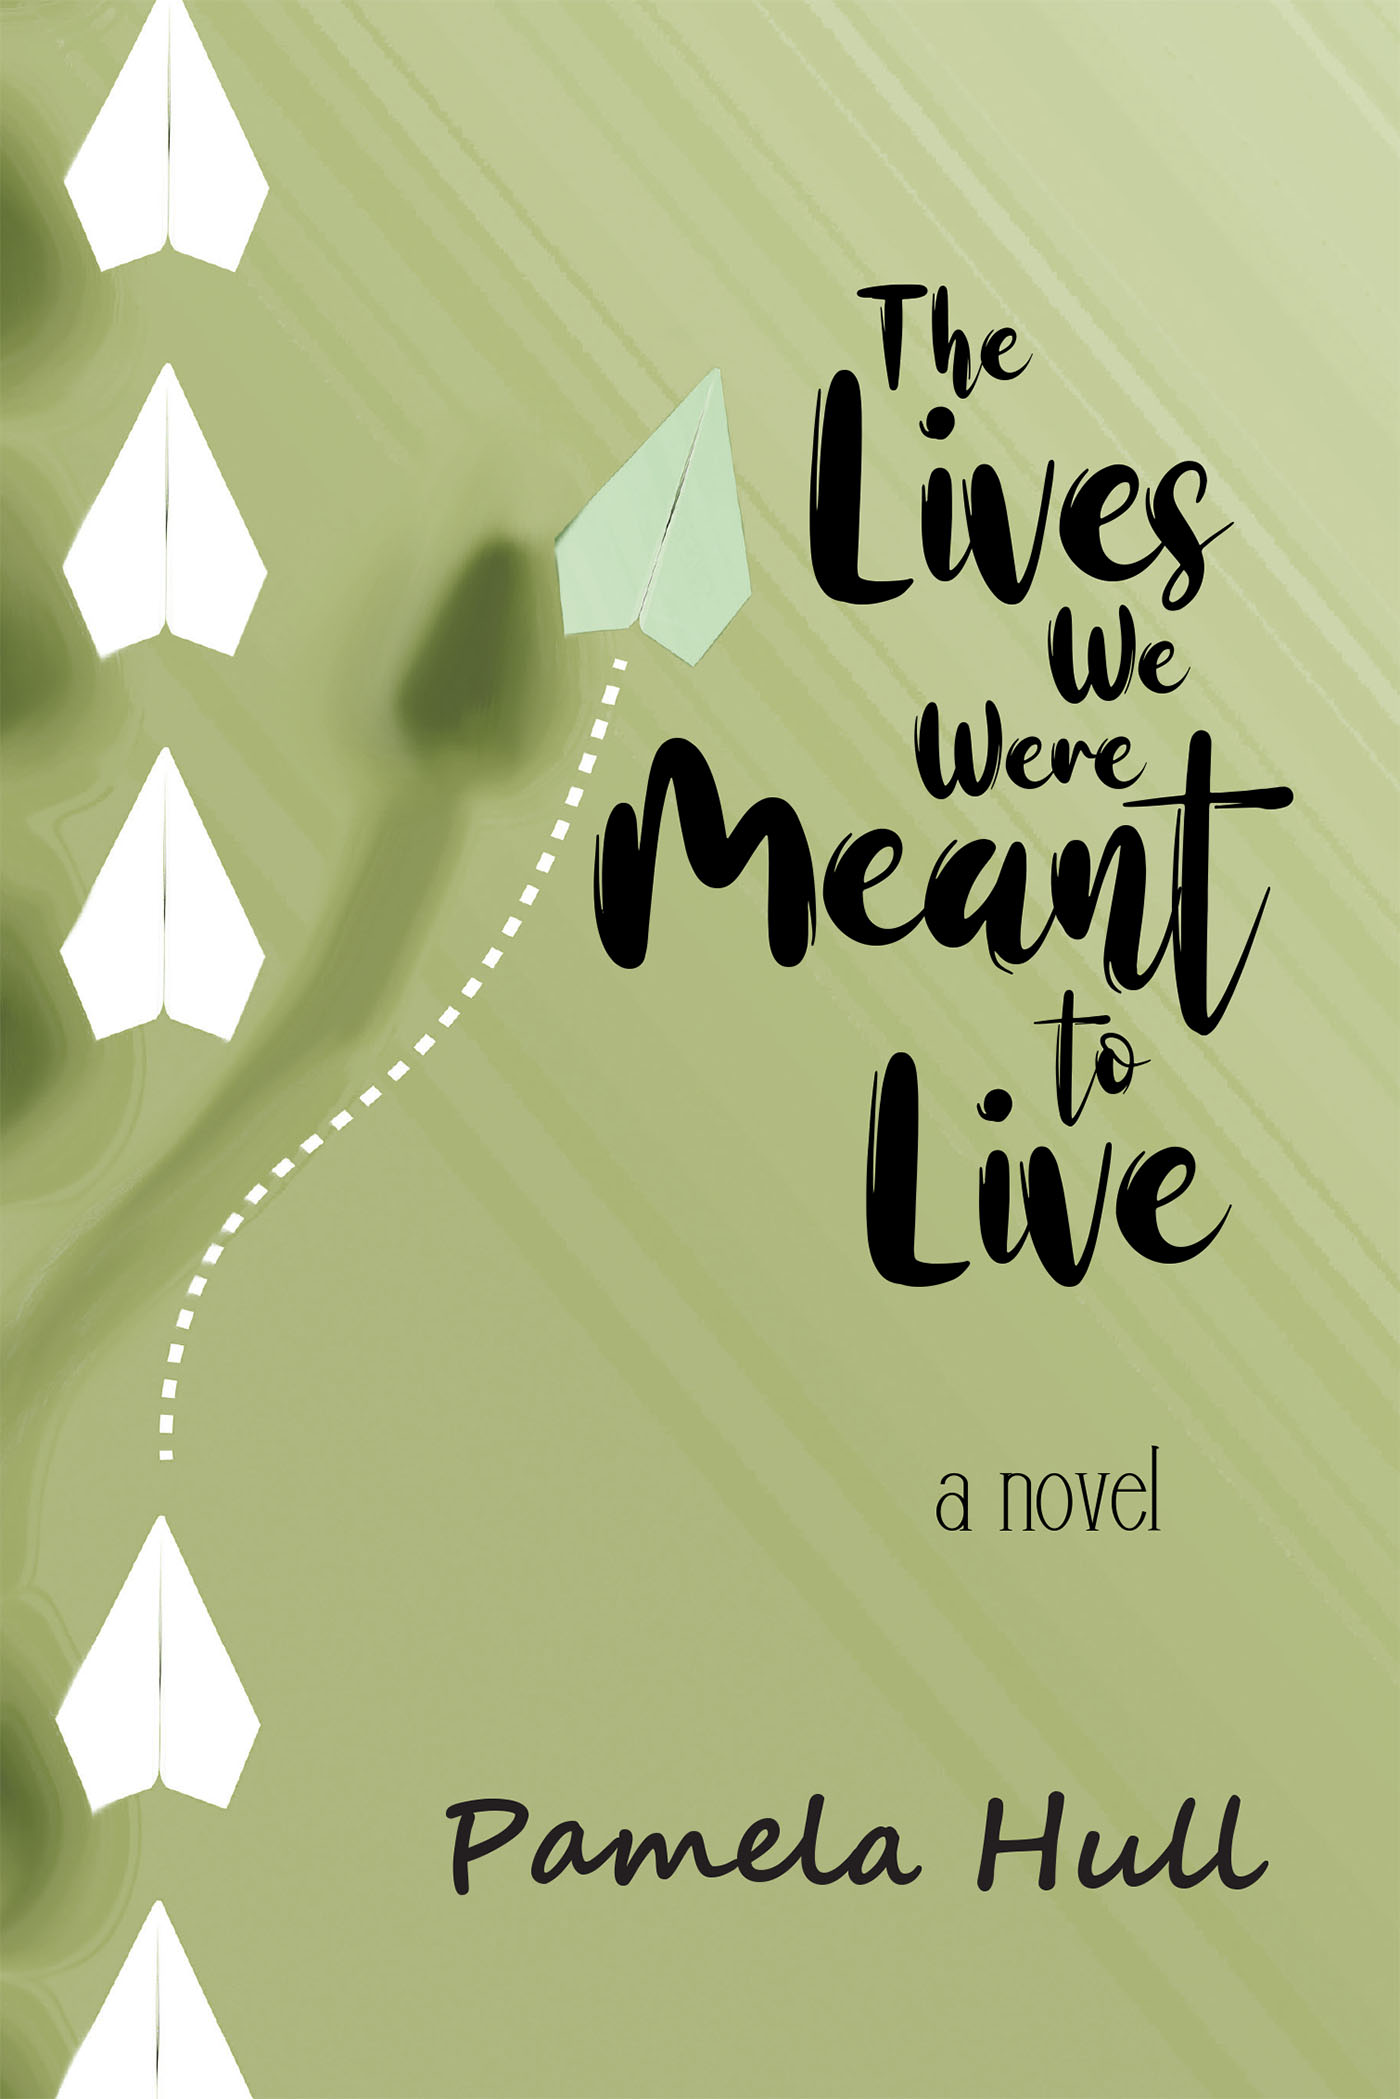 Author Pamela Hull’s New Book, "The Lives We Were Meant to Live," is a Dramatic Story of One Family’s Secrets, Choices, and Consequences